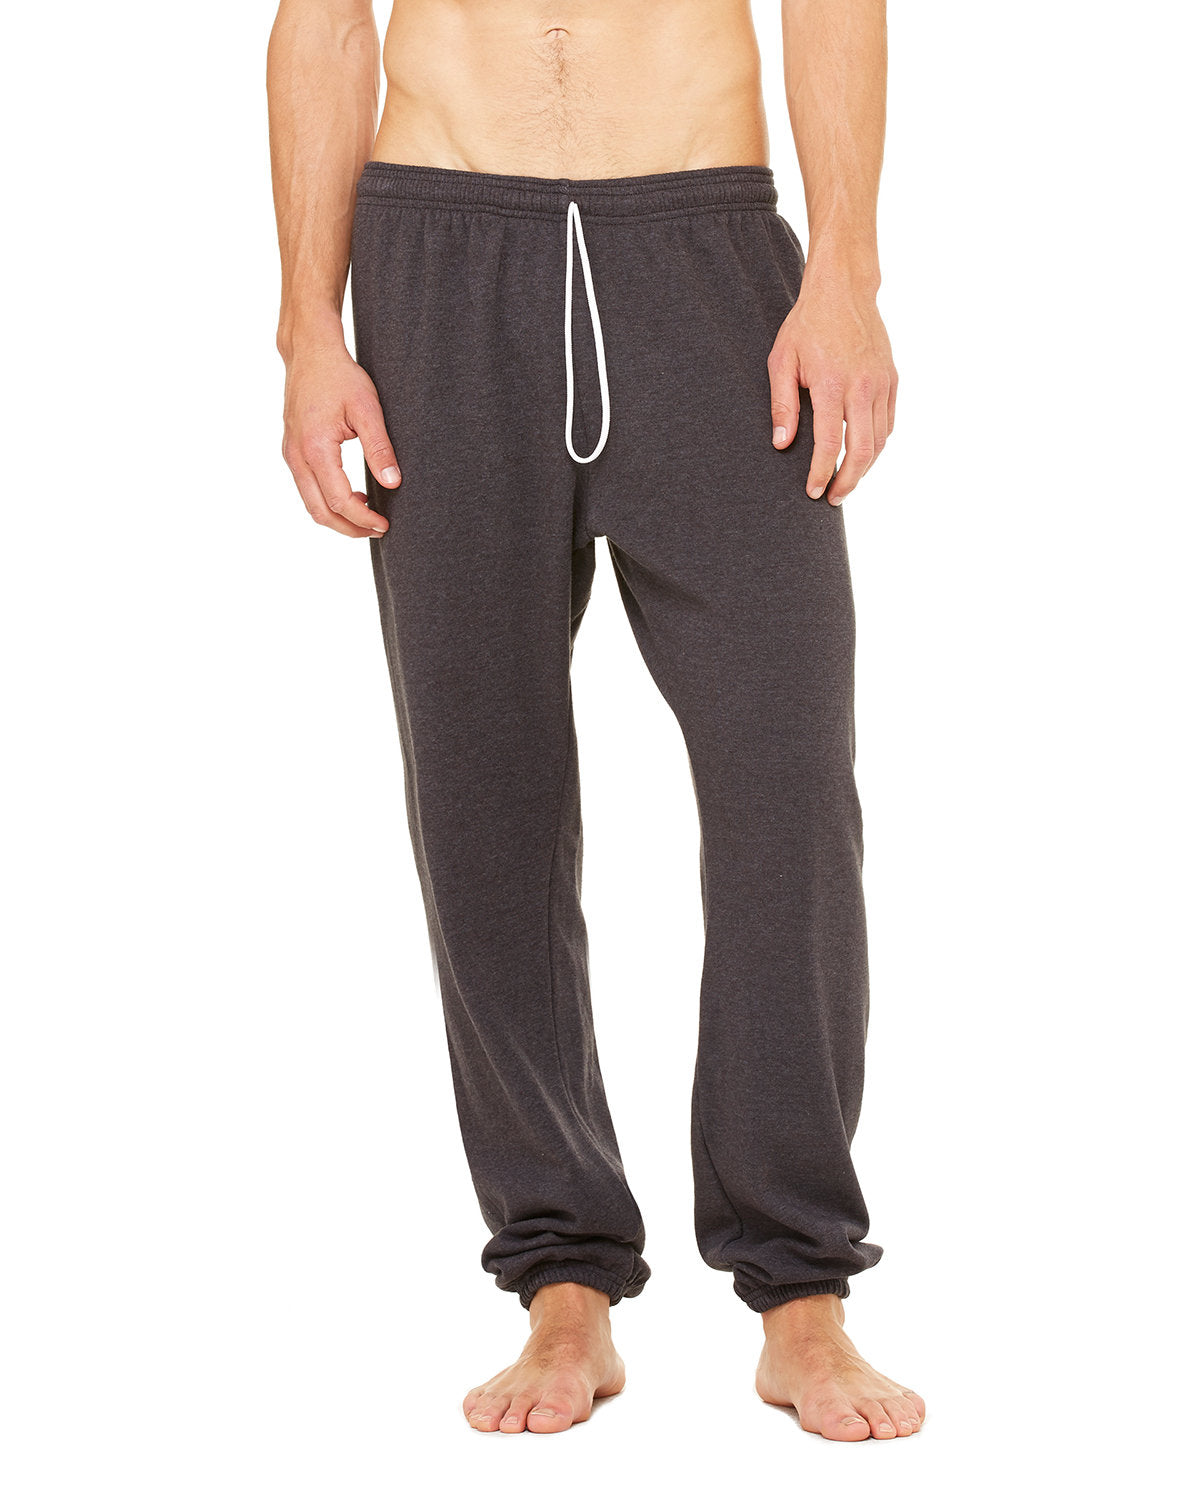 BrilliantMe Women's Closed Bottom Sweatpants with Pockets High